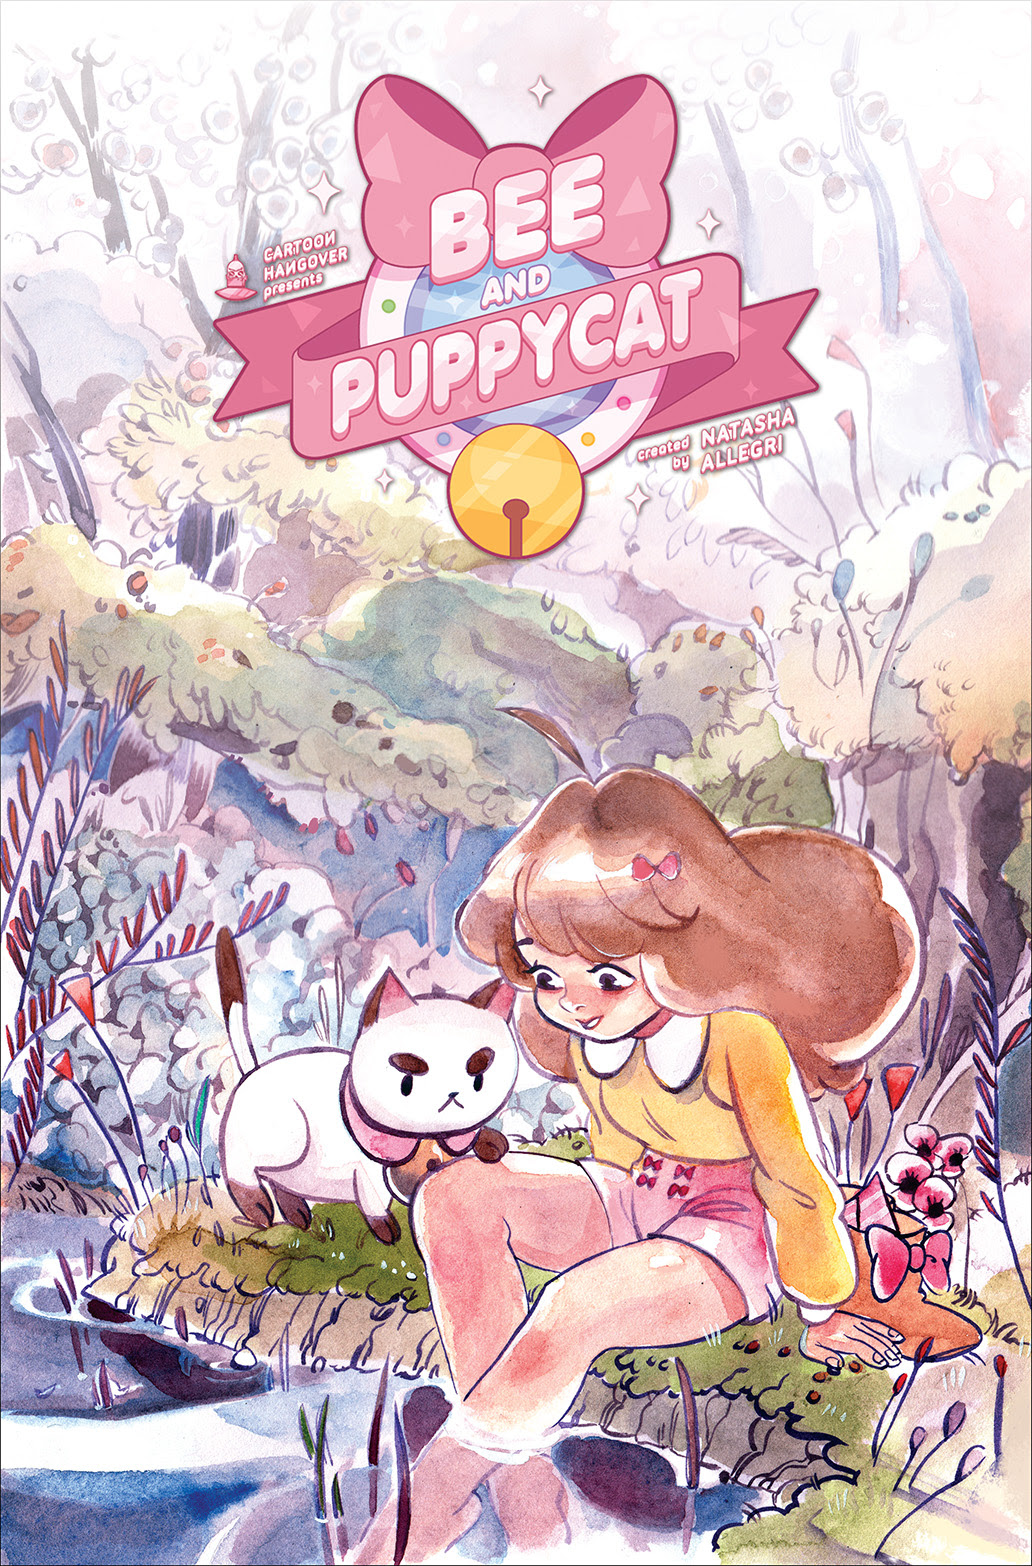 BEE AND PUPPYCAT #2 Cover A by Natasha Allegri